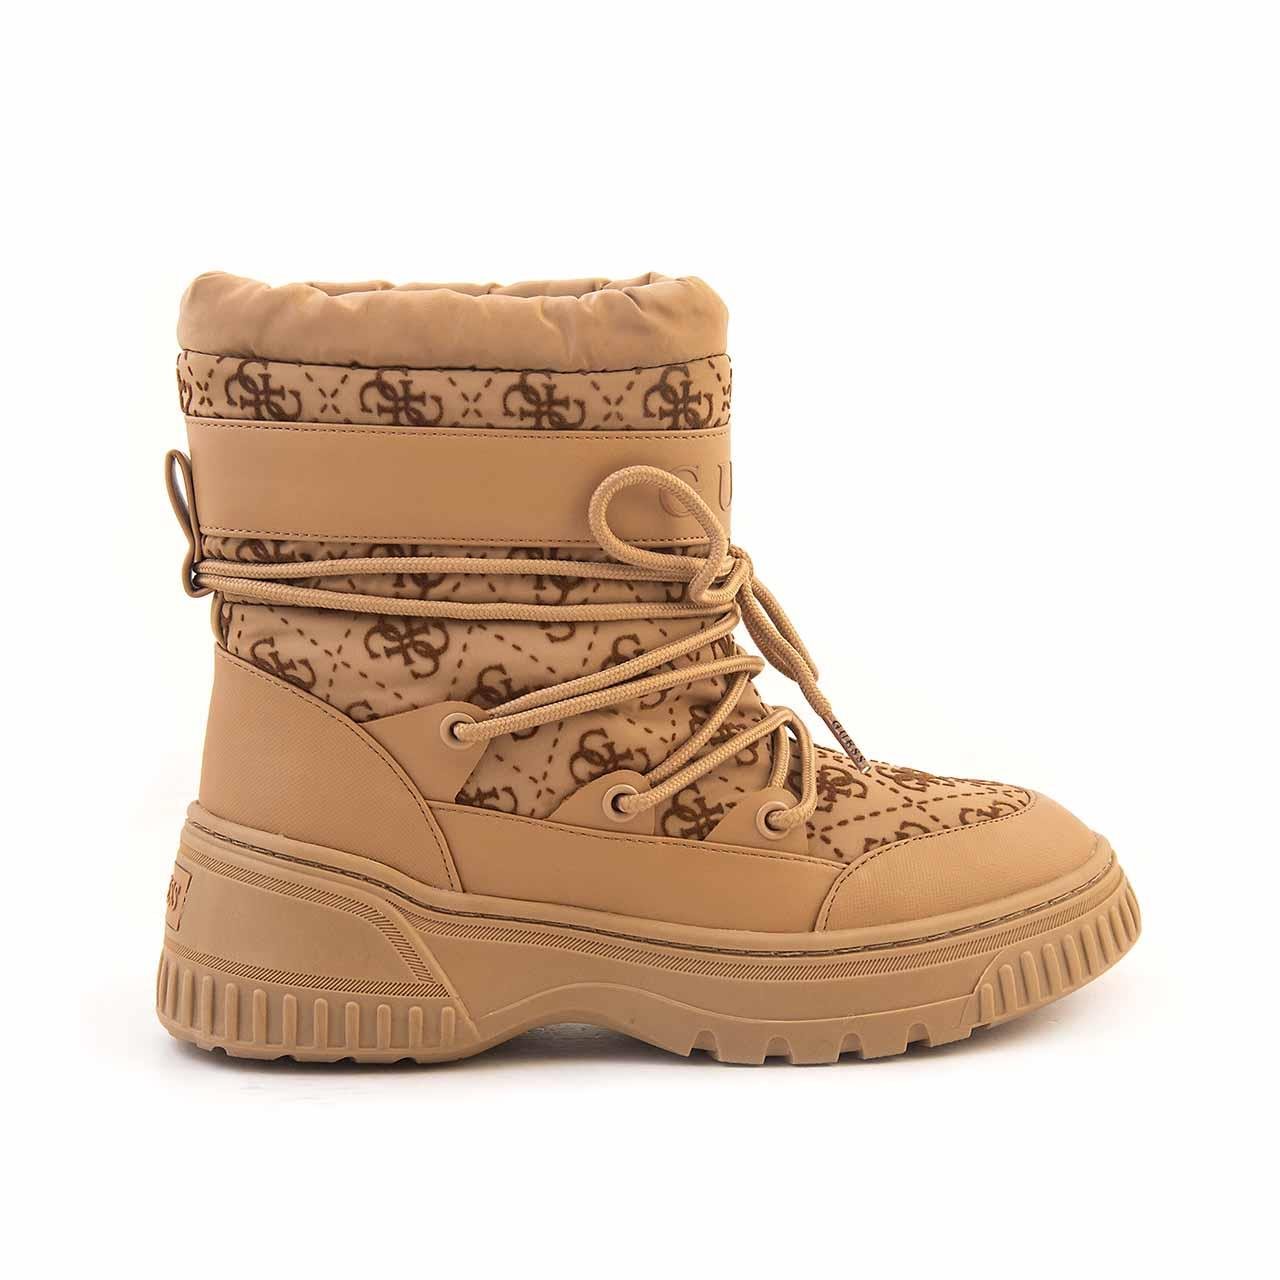 Guess Women's Casual Boots